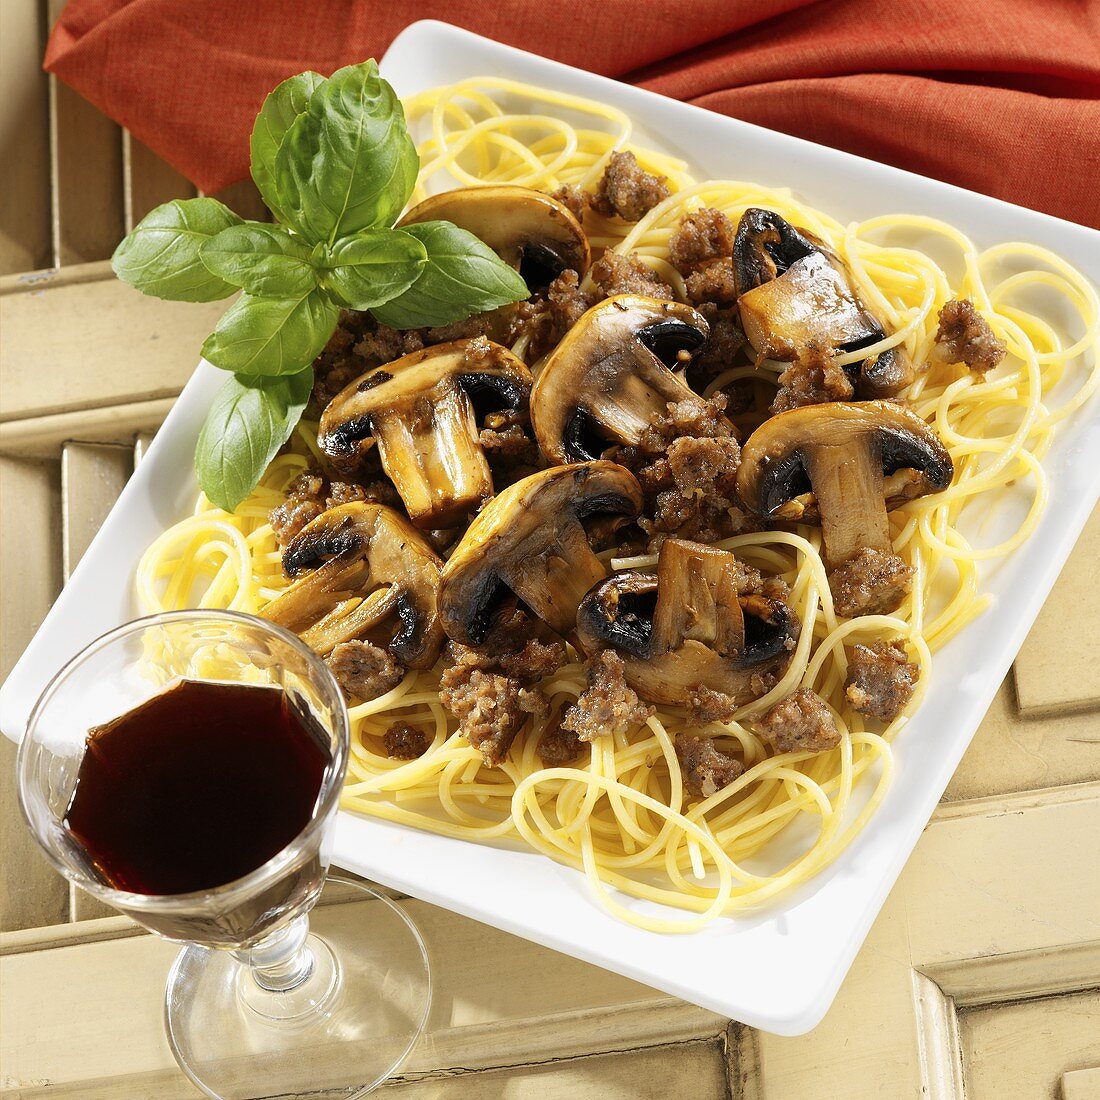 Spaghetti Topped with a Sausage and Mushroom Sauce with Basil Garnish, Red Wine